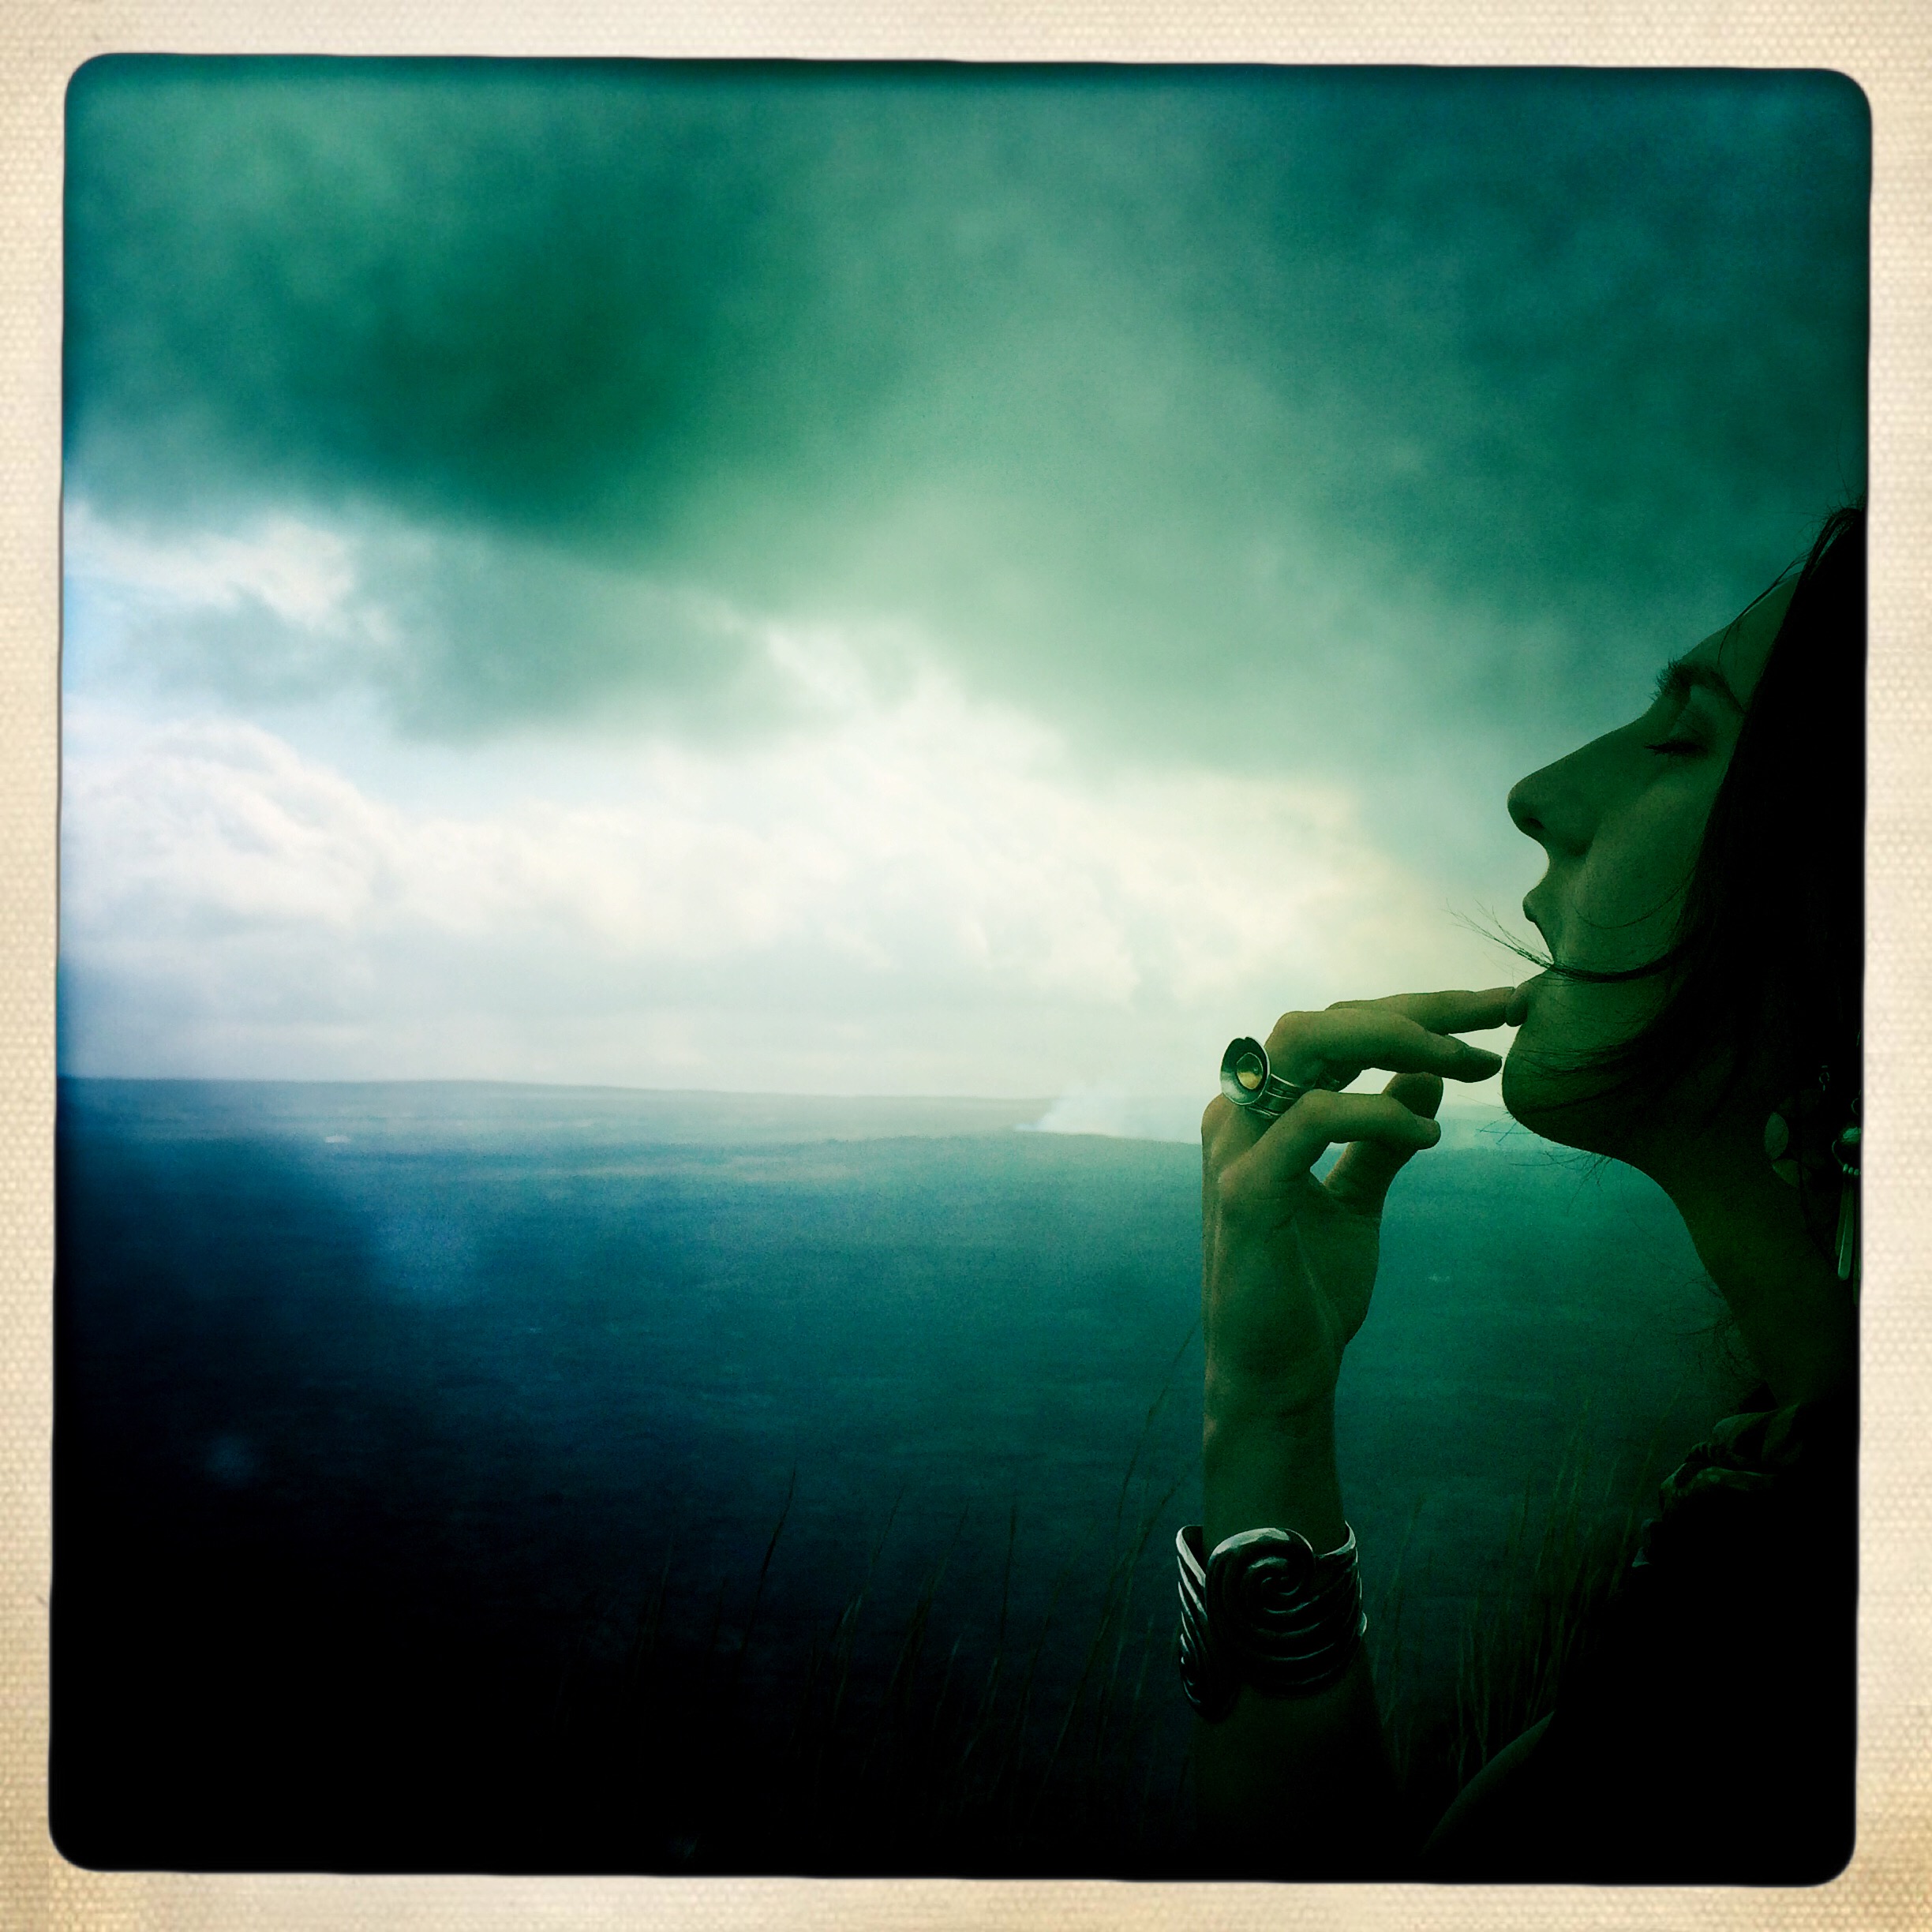 Oh For A Muse of Fire | self-portrait on the edge of the Kilauea volcano Caldera | Hawaii, February 2015